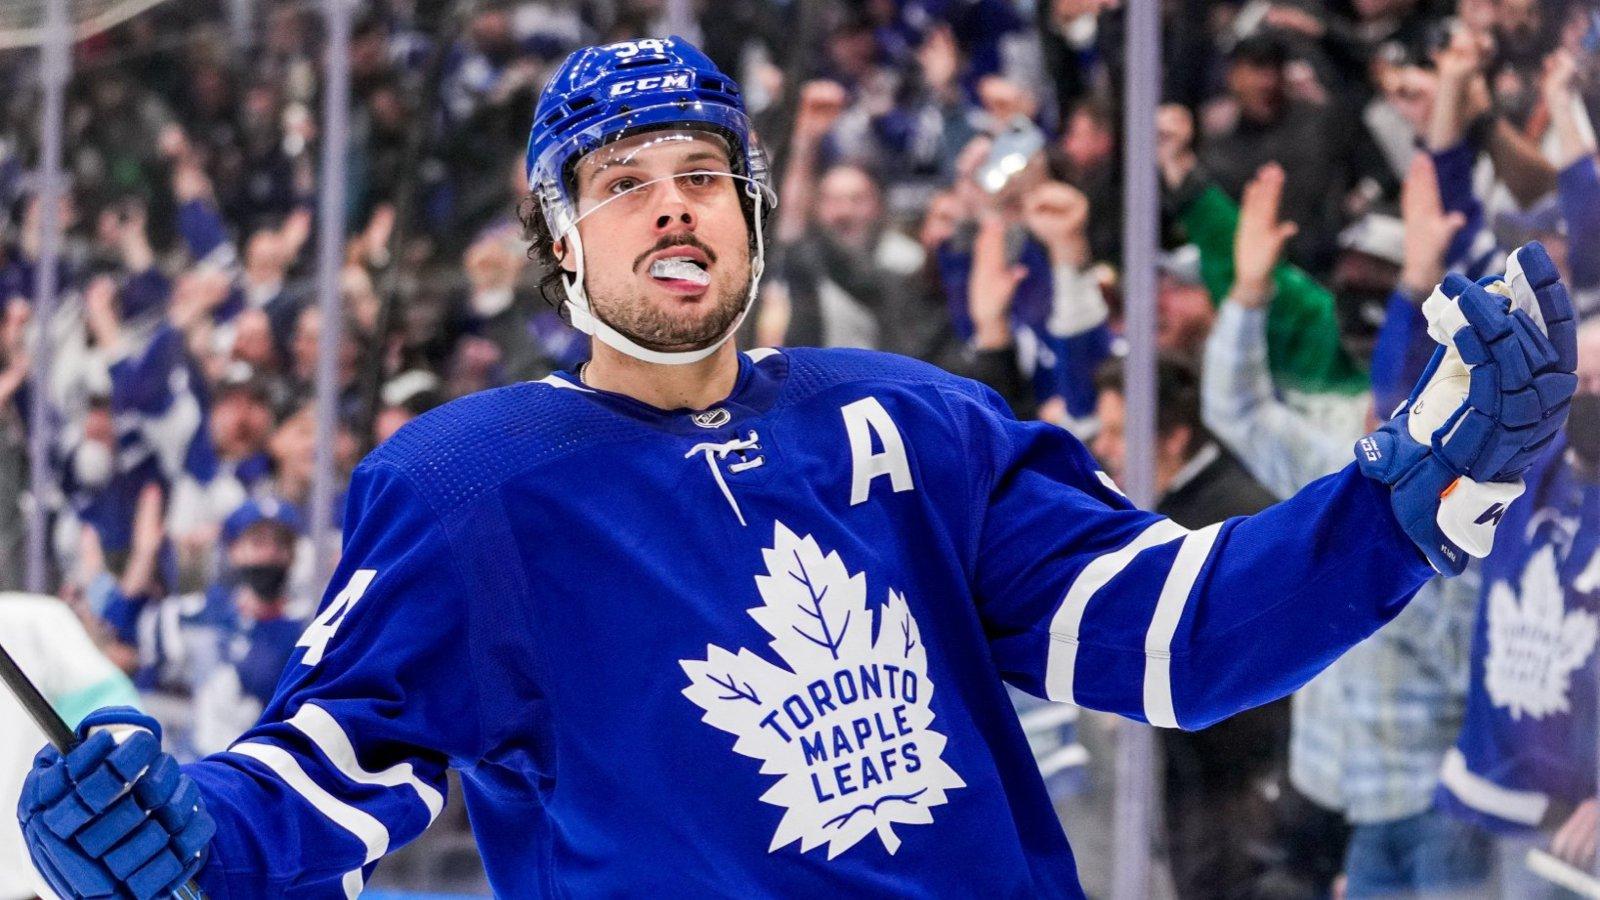 NHL Playoffs: Maple Leafs vs Bruins, Game 1 Preview: Is This Toronto’s Year?